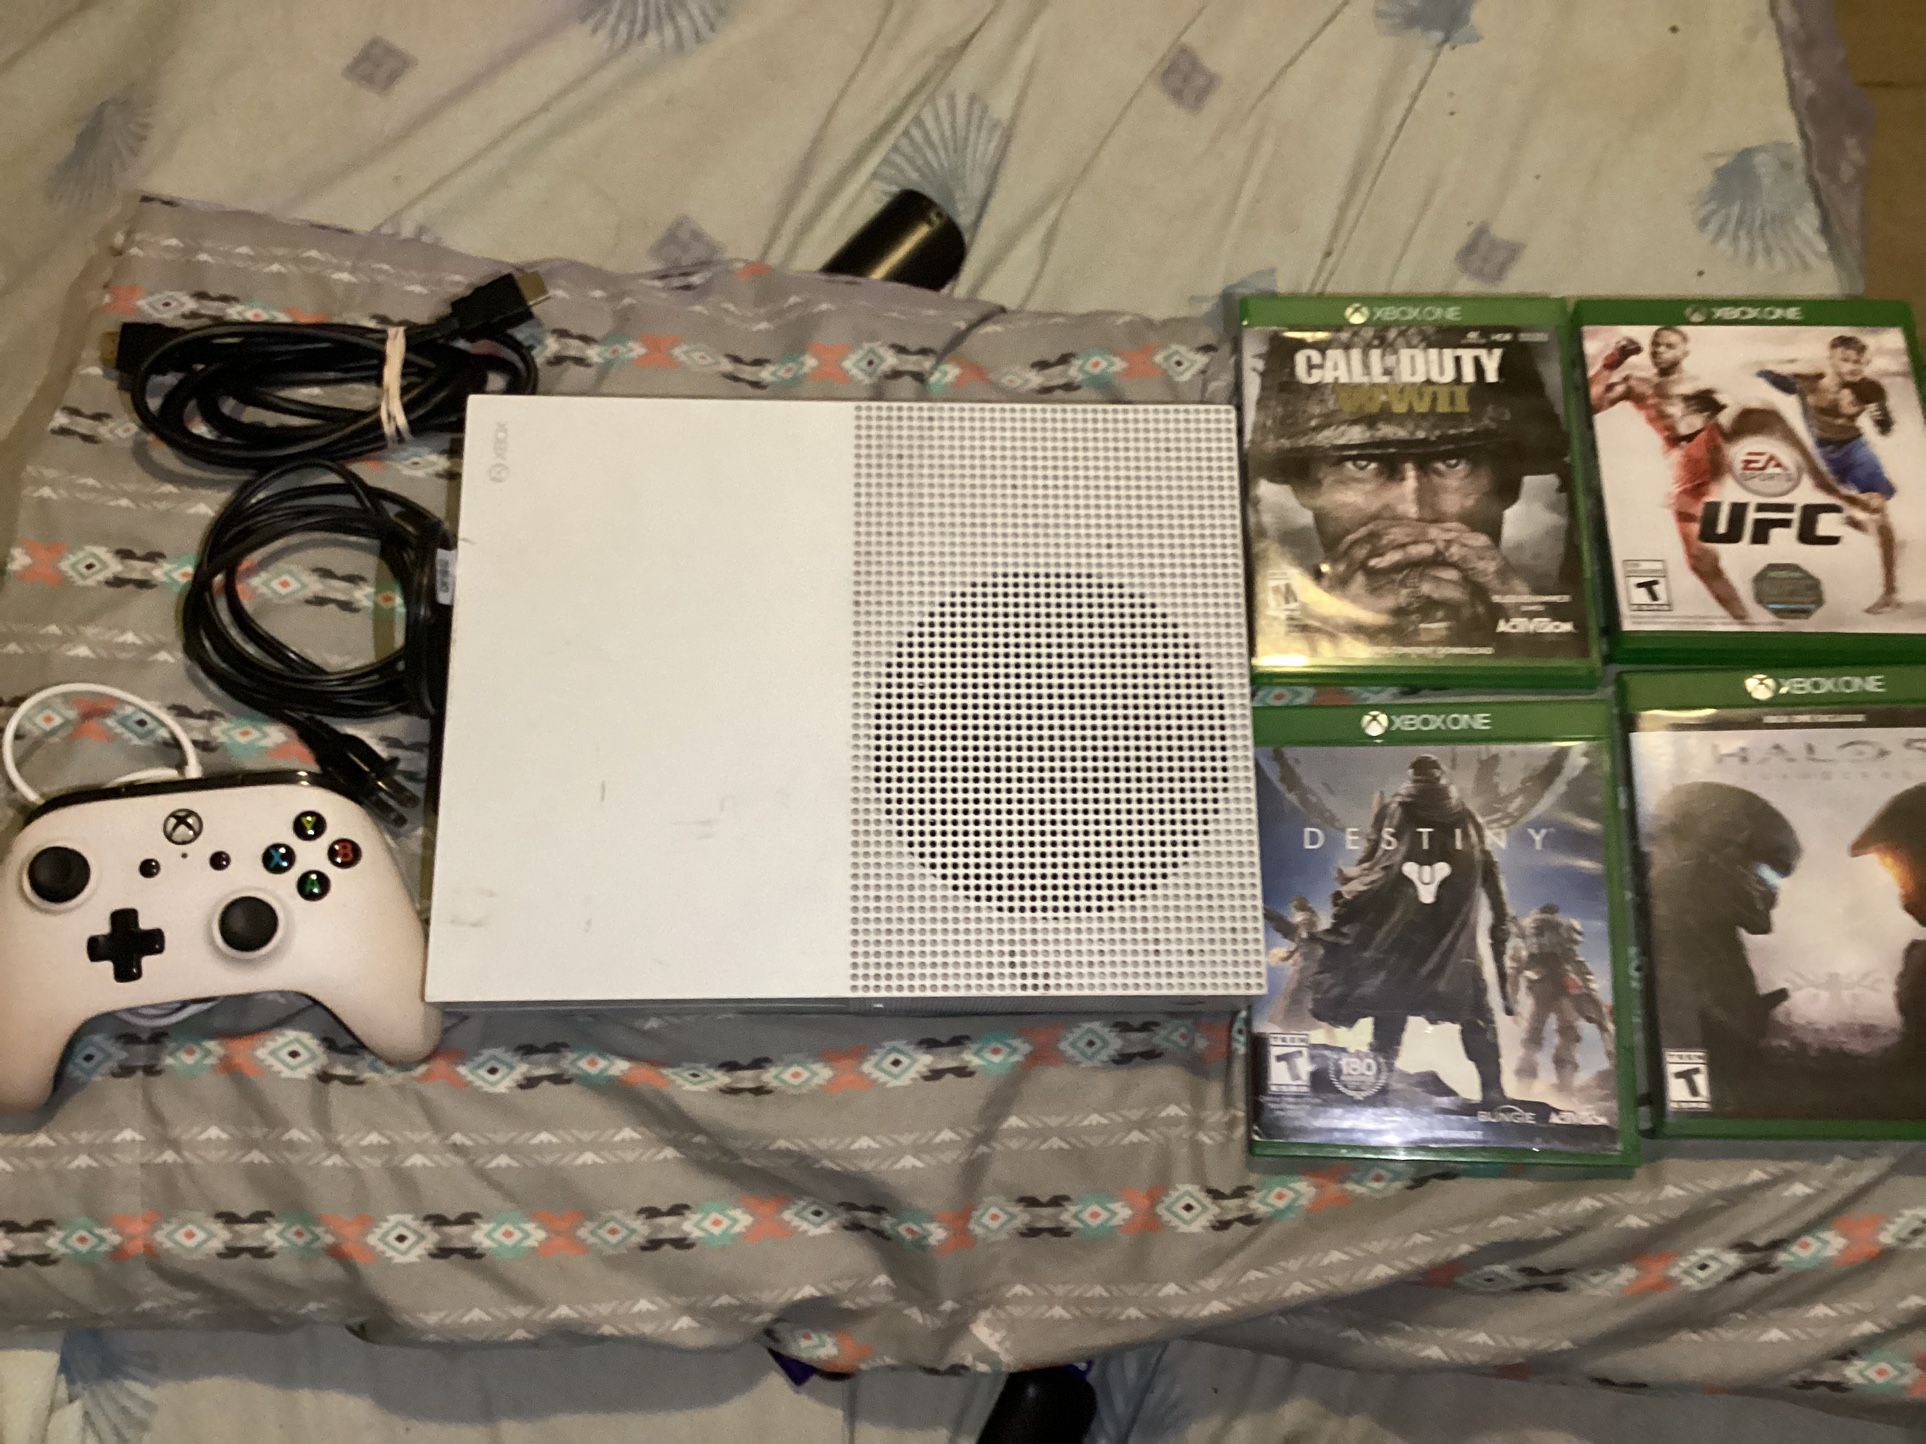 Microsoft Xbox One S 500 GB Console with cords,powerA controller and 4 games Call of duty WW 2,Destiny,Halo 5,and UFC 